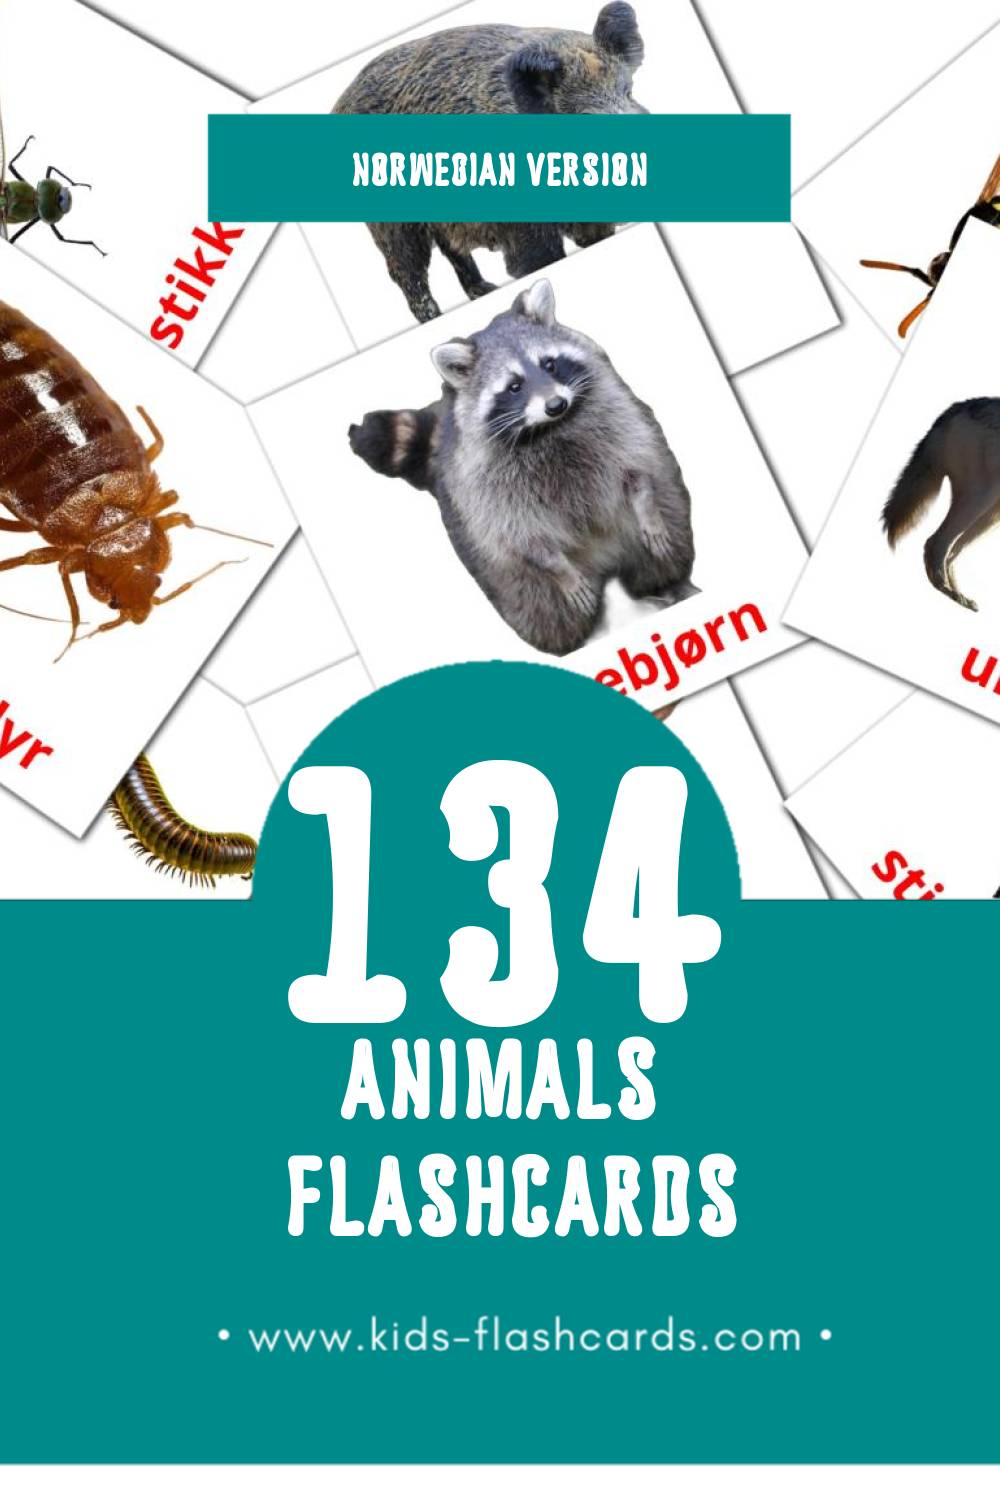 Visual dyr Flashcards for Toddlers (134 cards in Norwegian)